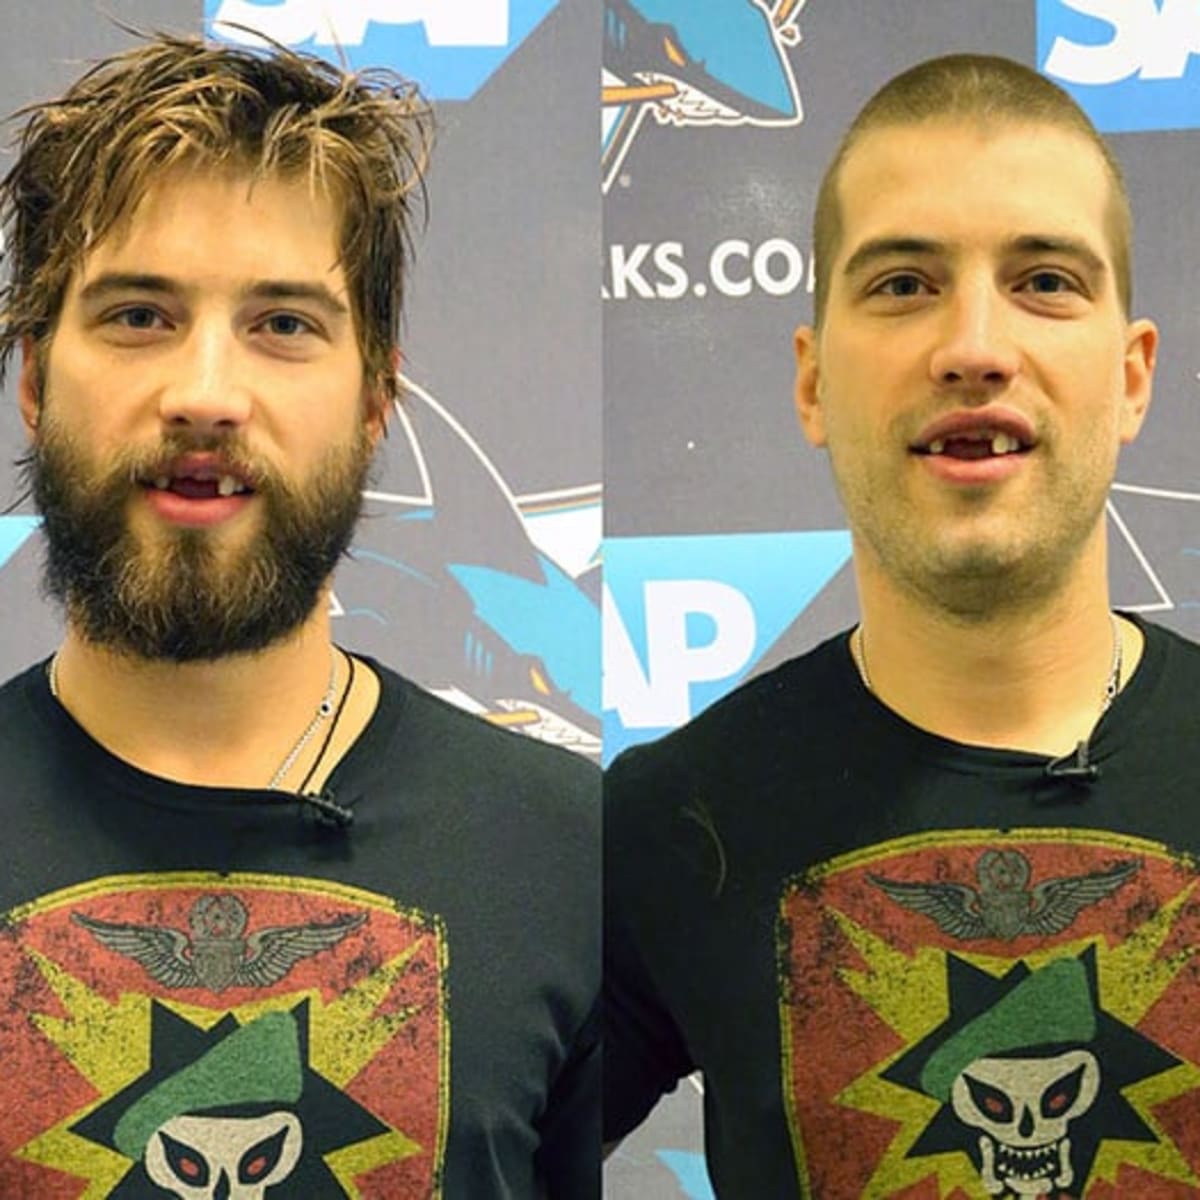 Brent Burns, the NHL's hairiest man, is now completely clean-shaven